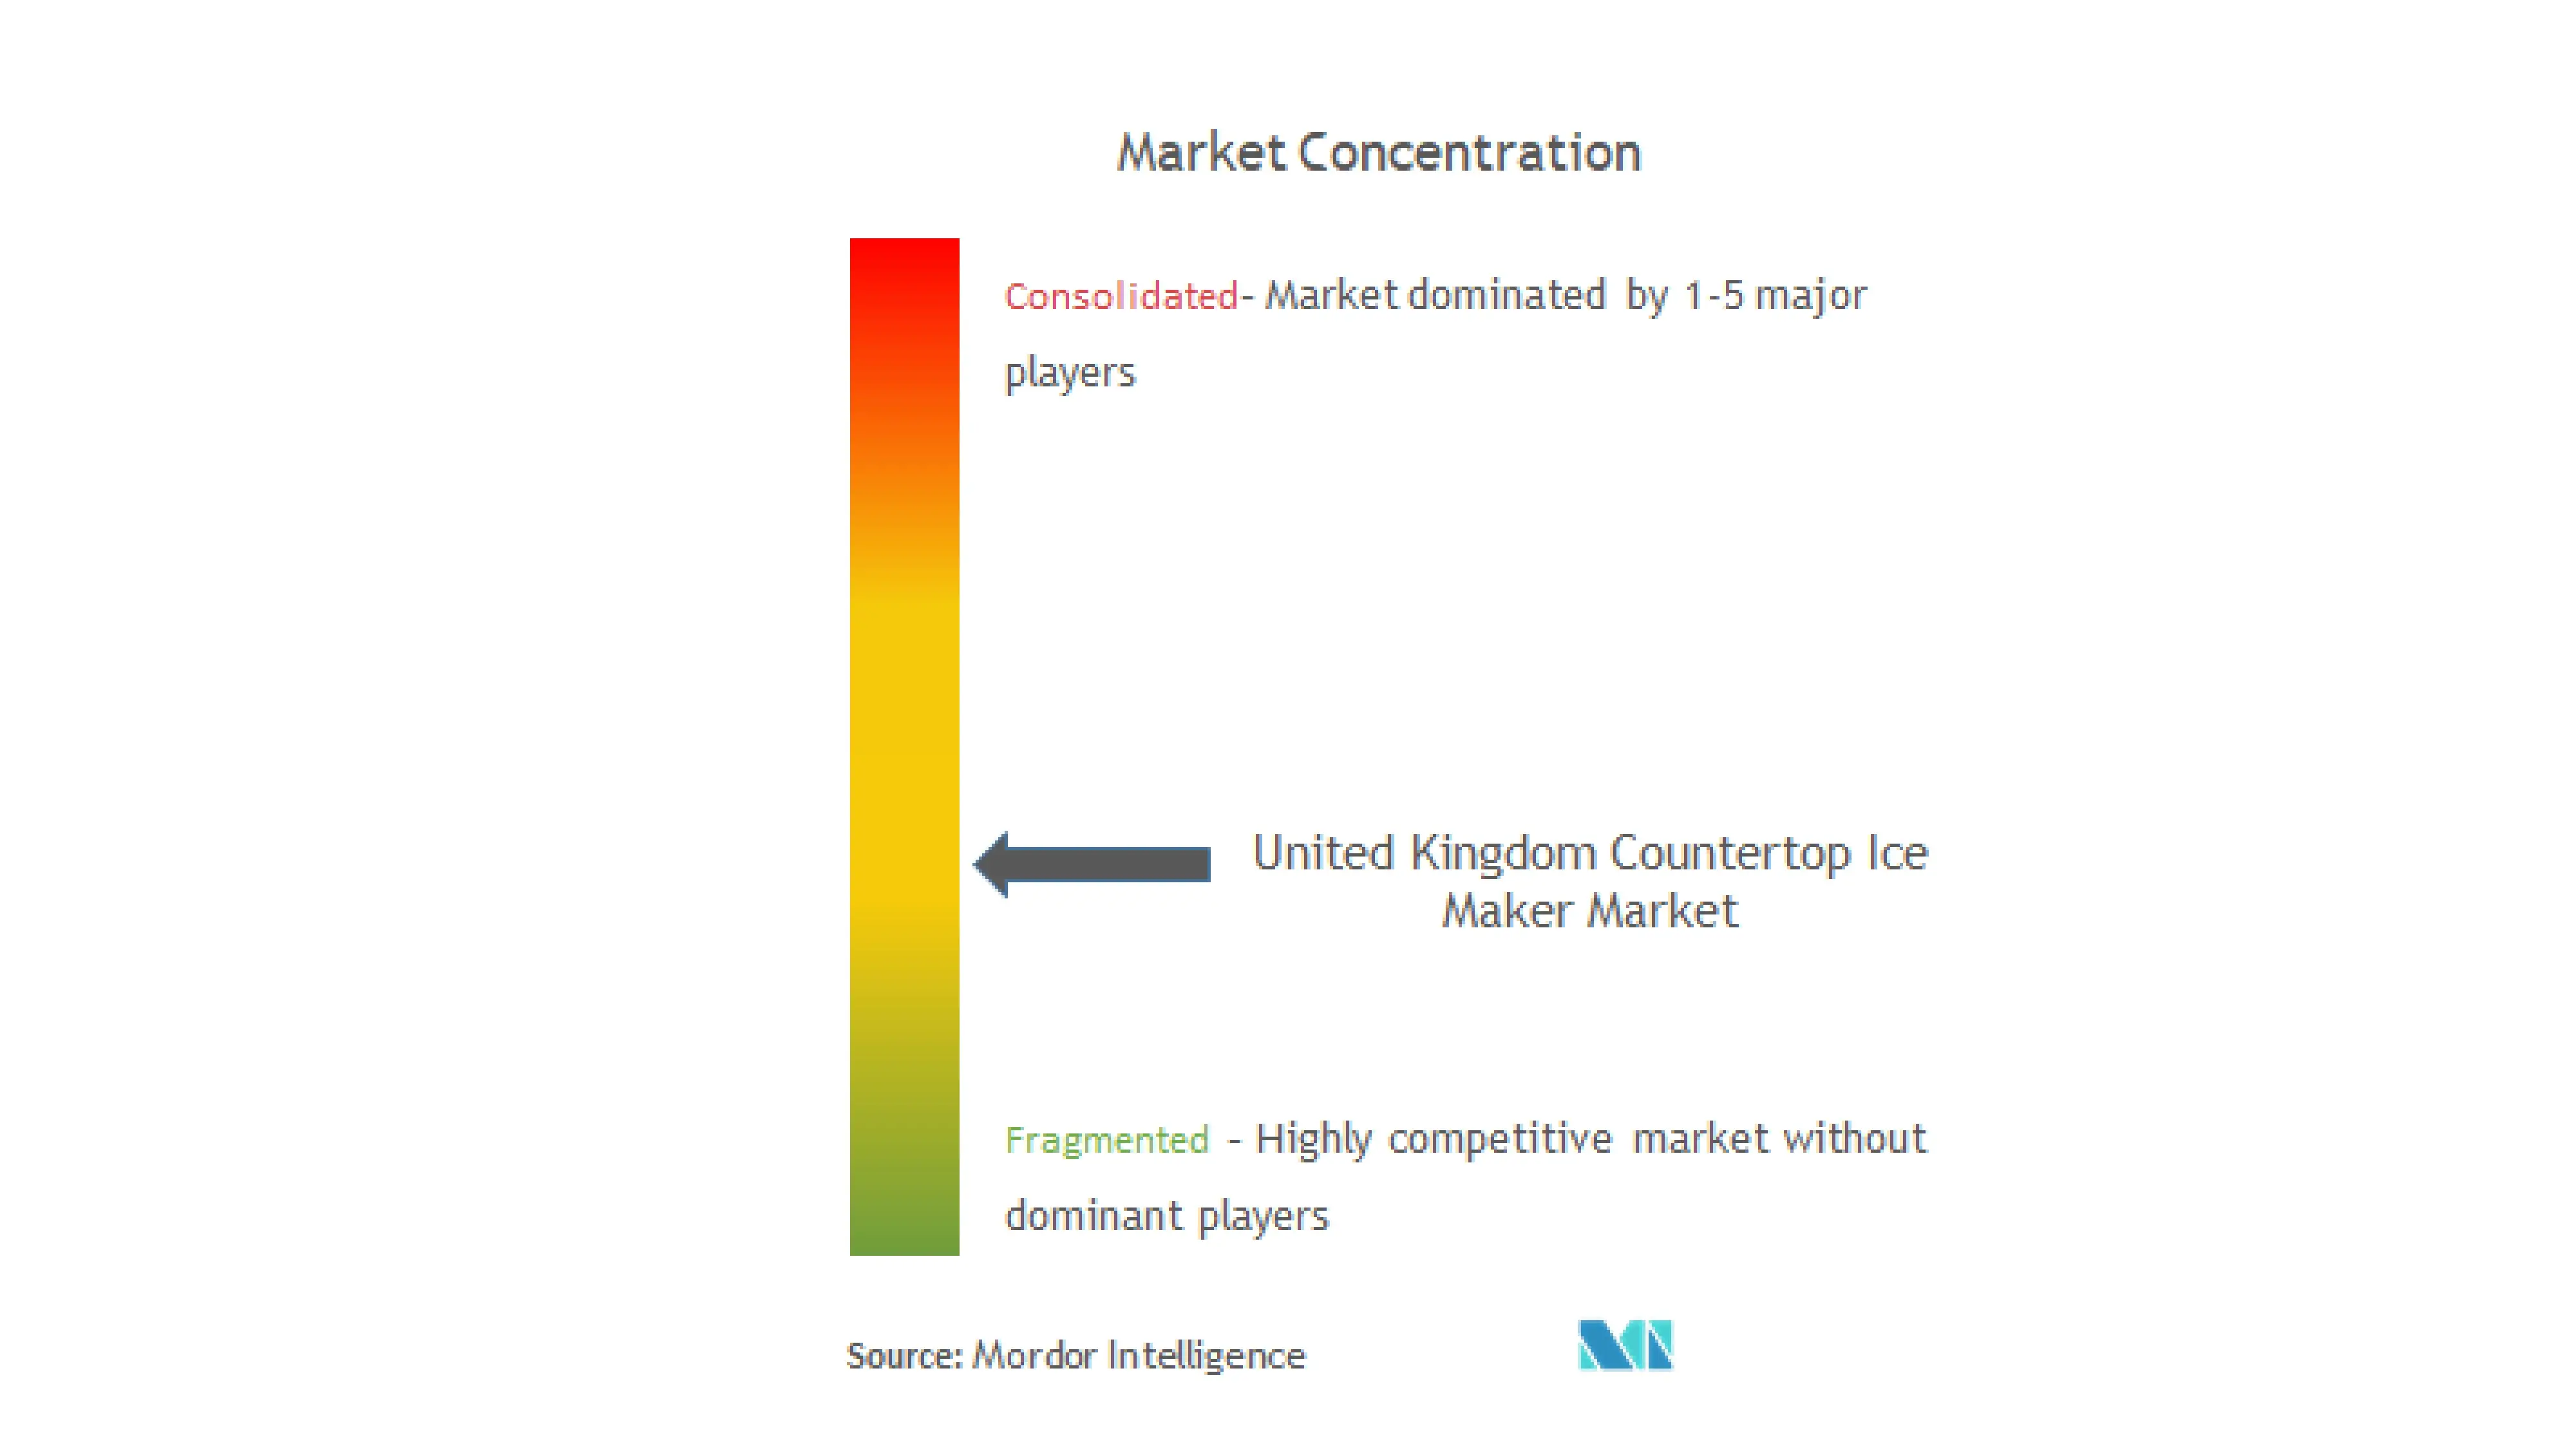 UK Countertop Ice Makers Market Concentration